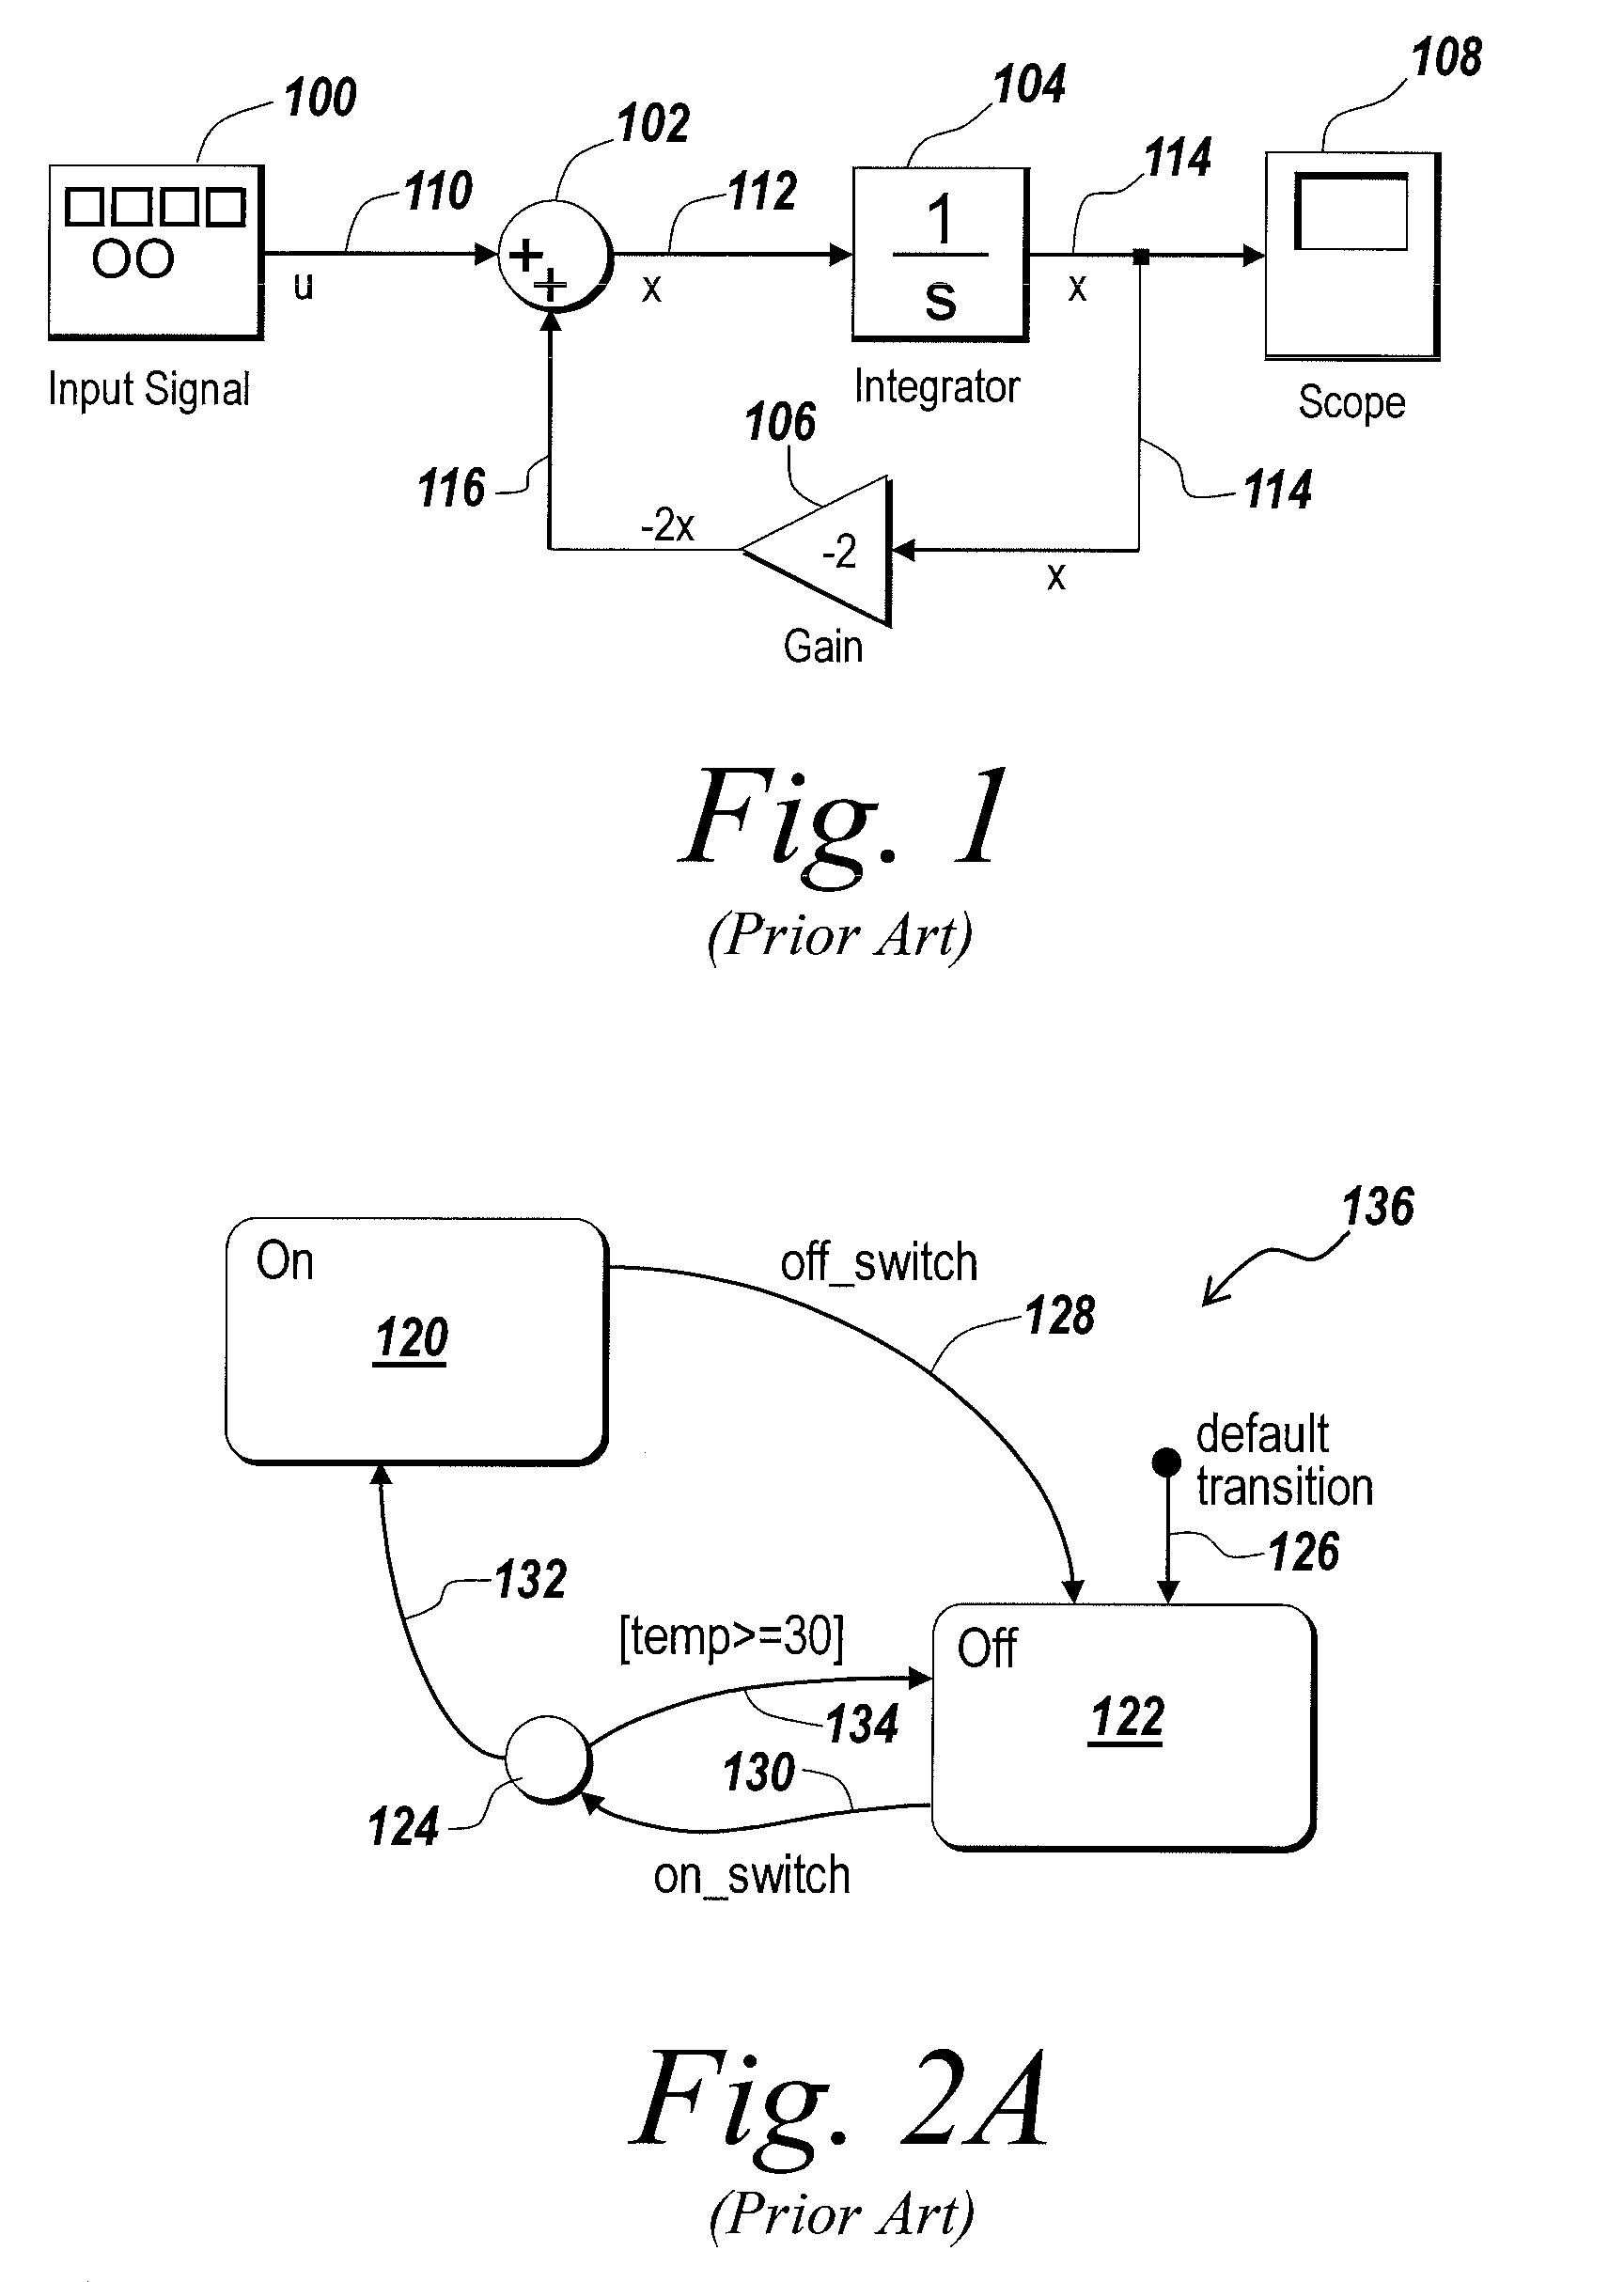 System and method of using an active link in a state programming environment to locate an element